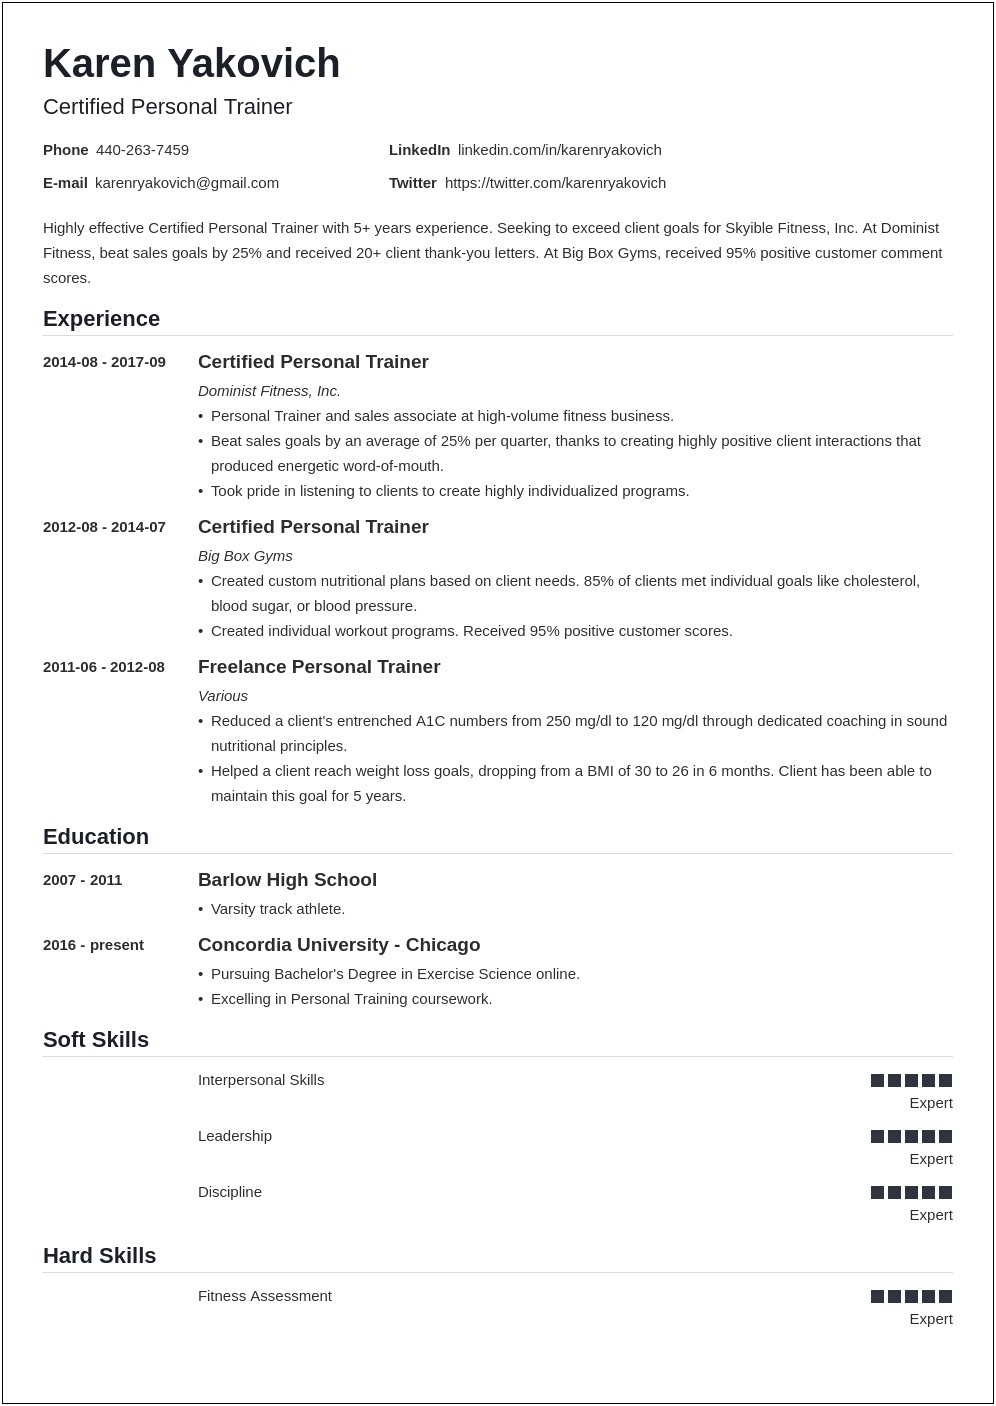 24 Hour Fitness Personal Trainer Example Resume